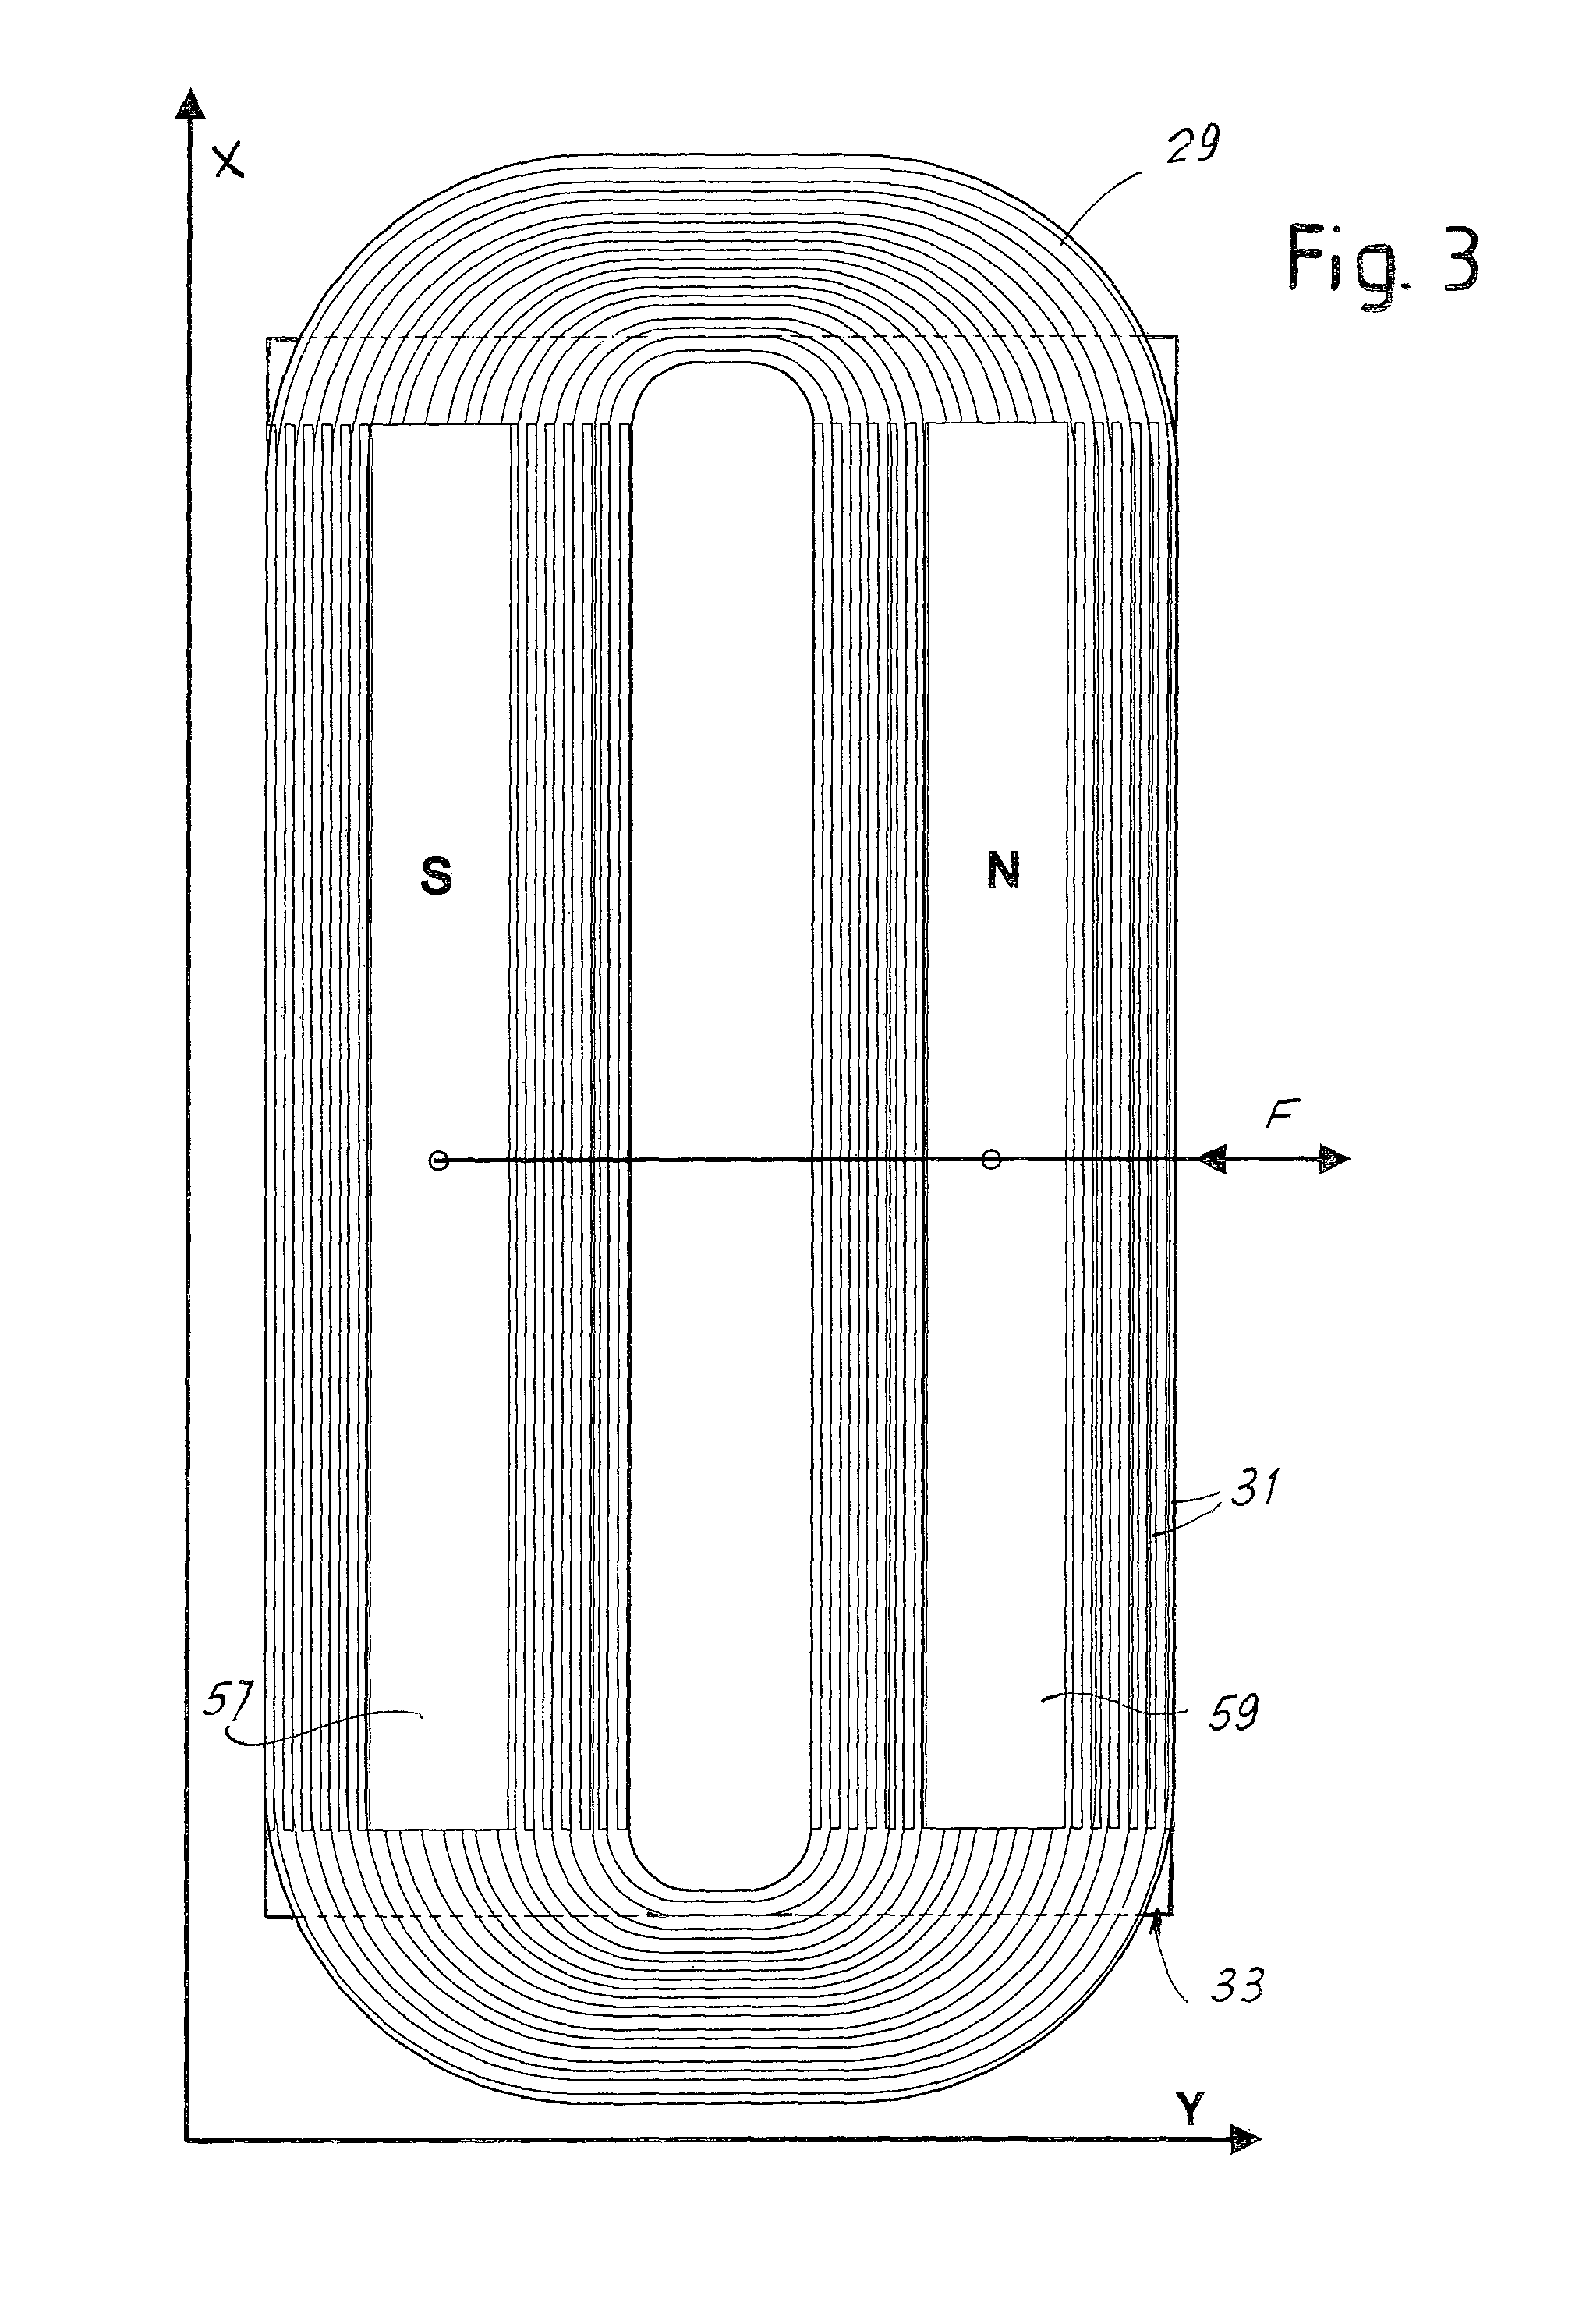 Electromechanical conversion system with moving magnets; acoustic diffuser comprising said system and a moving member that generates sound waves